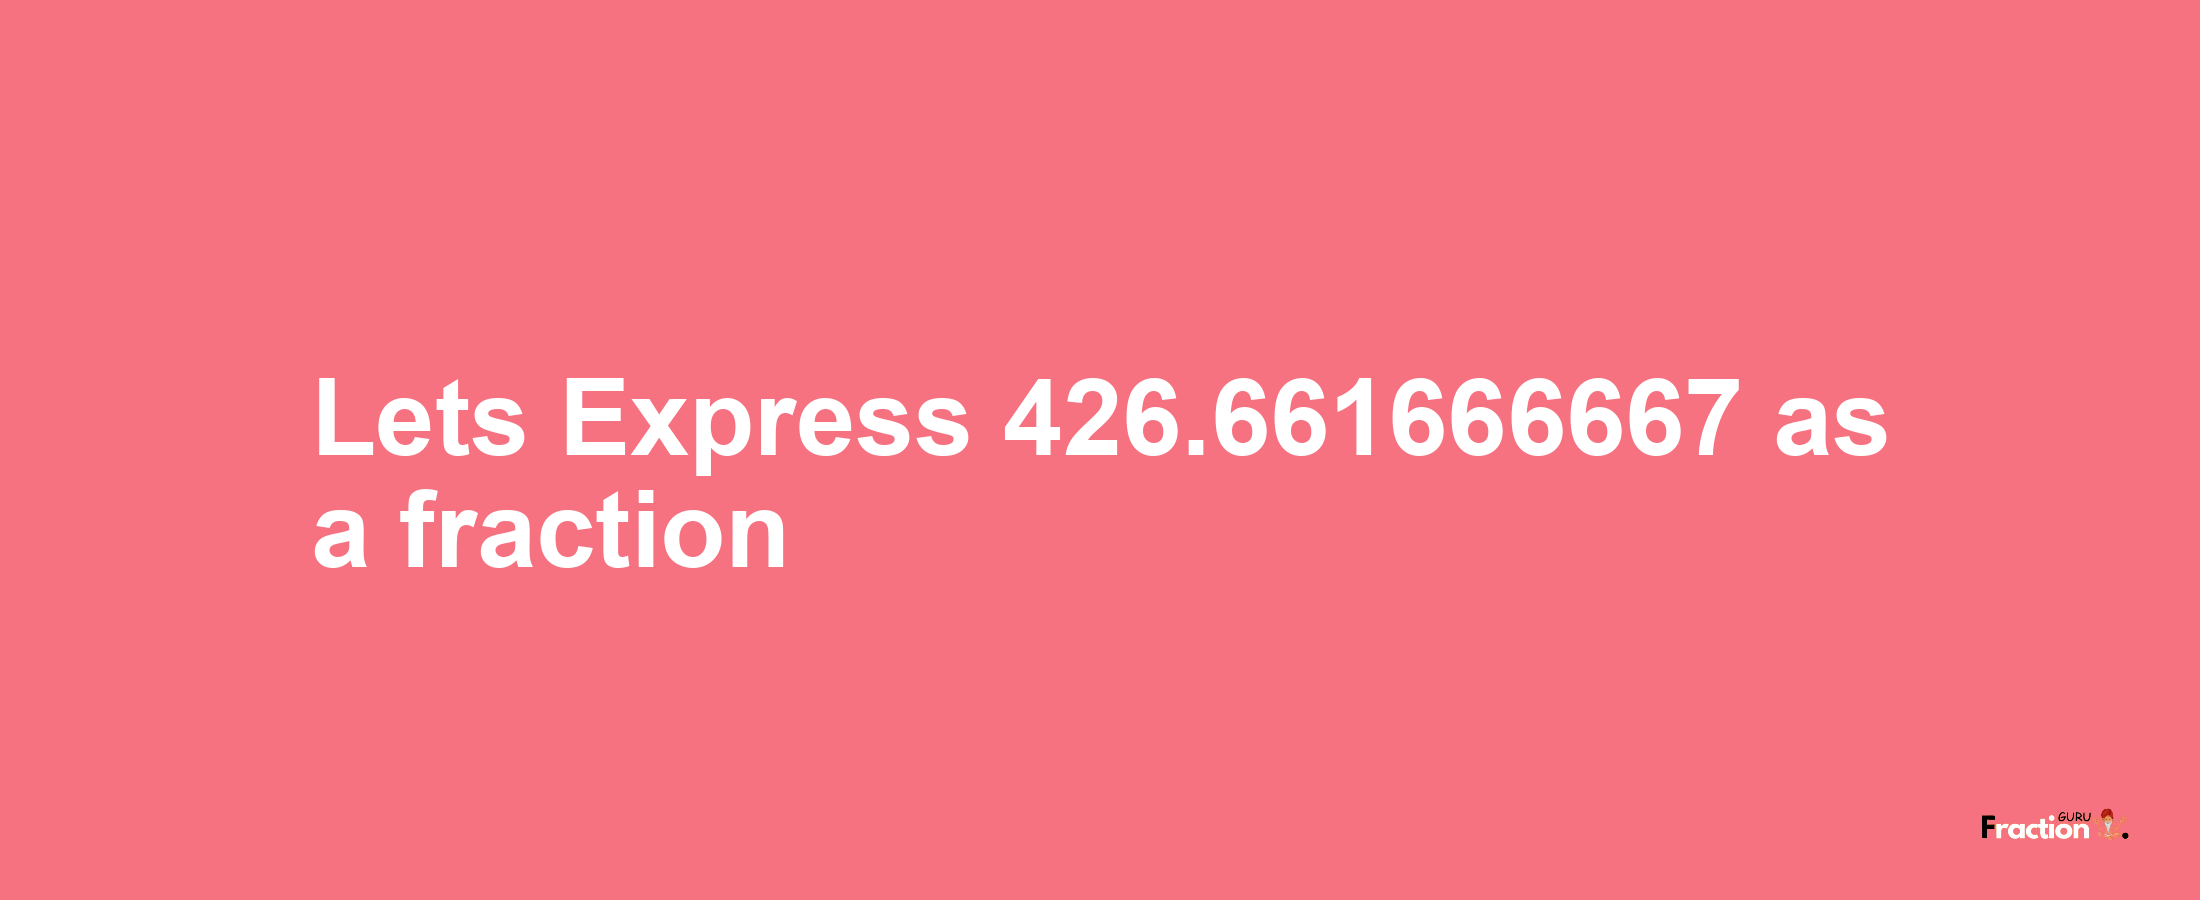 Lets Express 426.661666667 as afraction